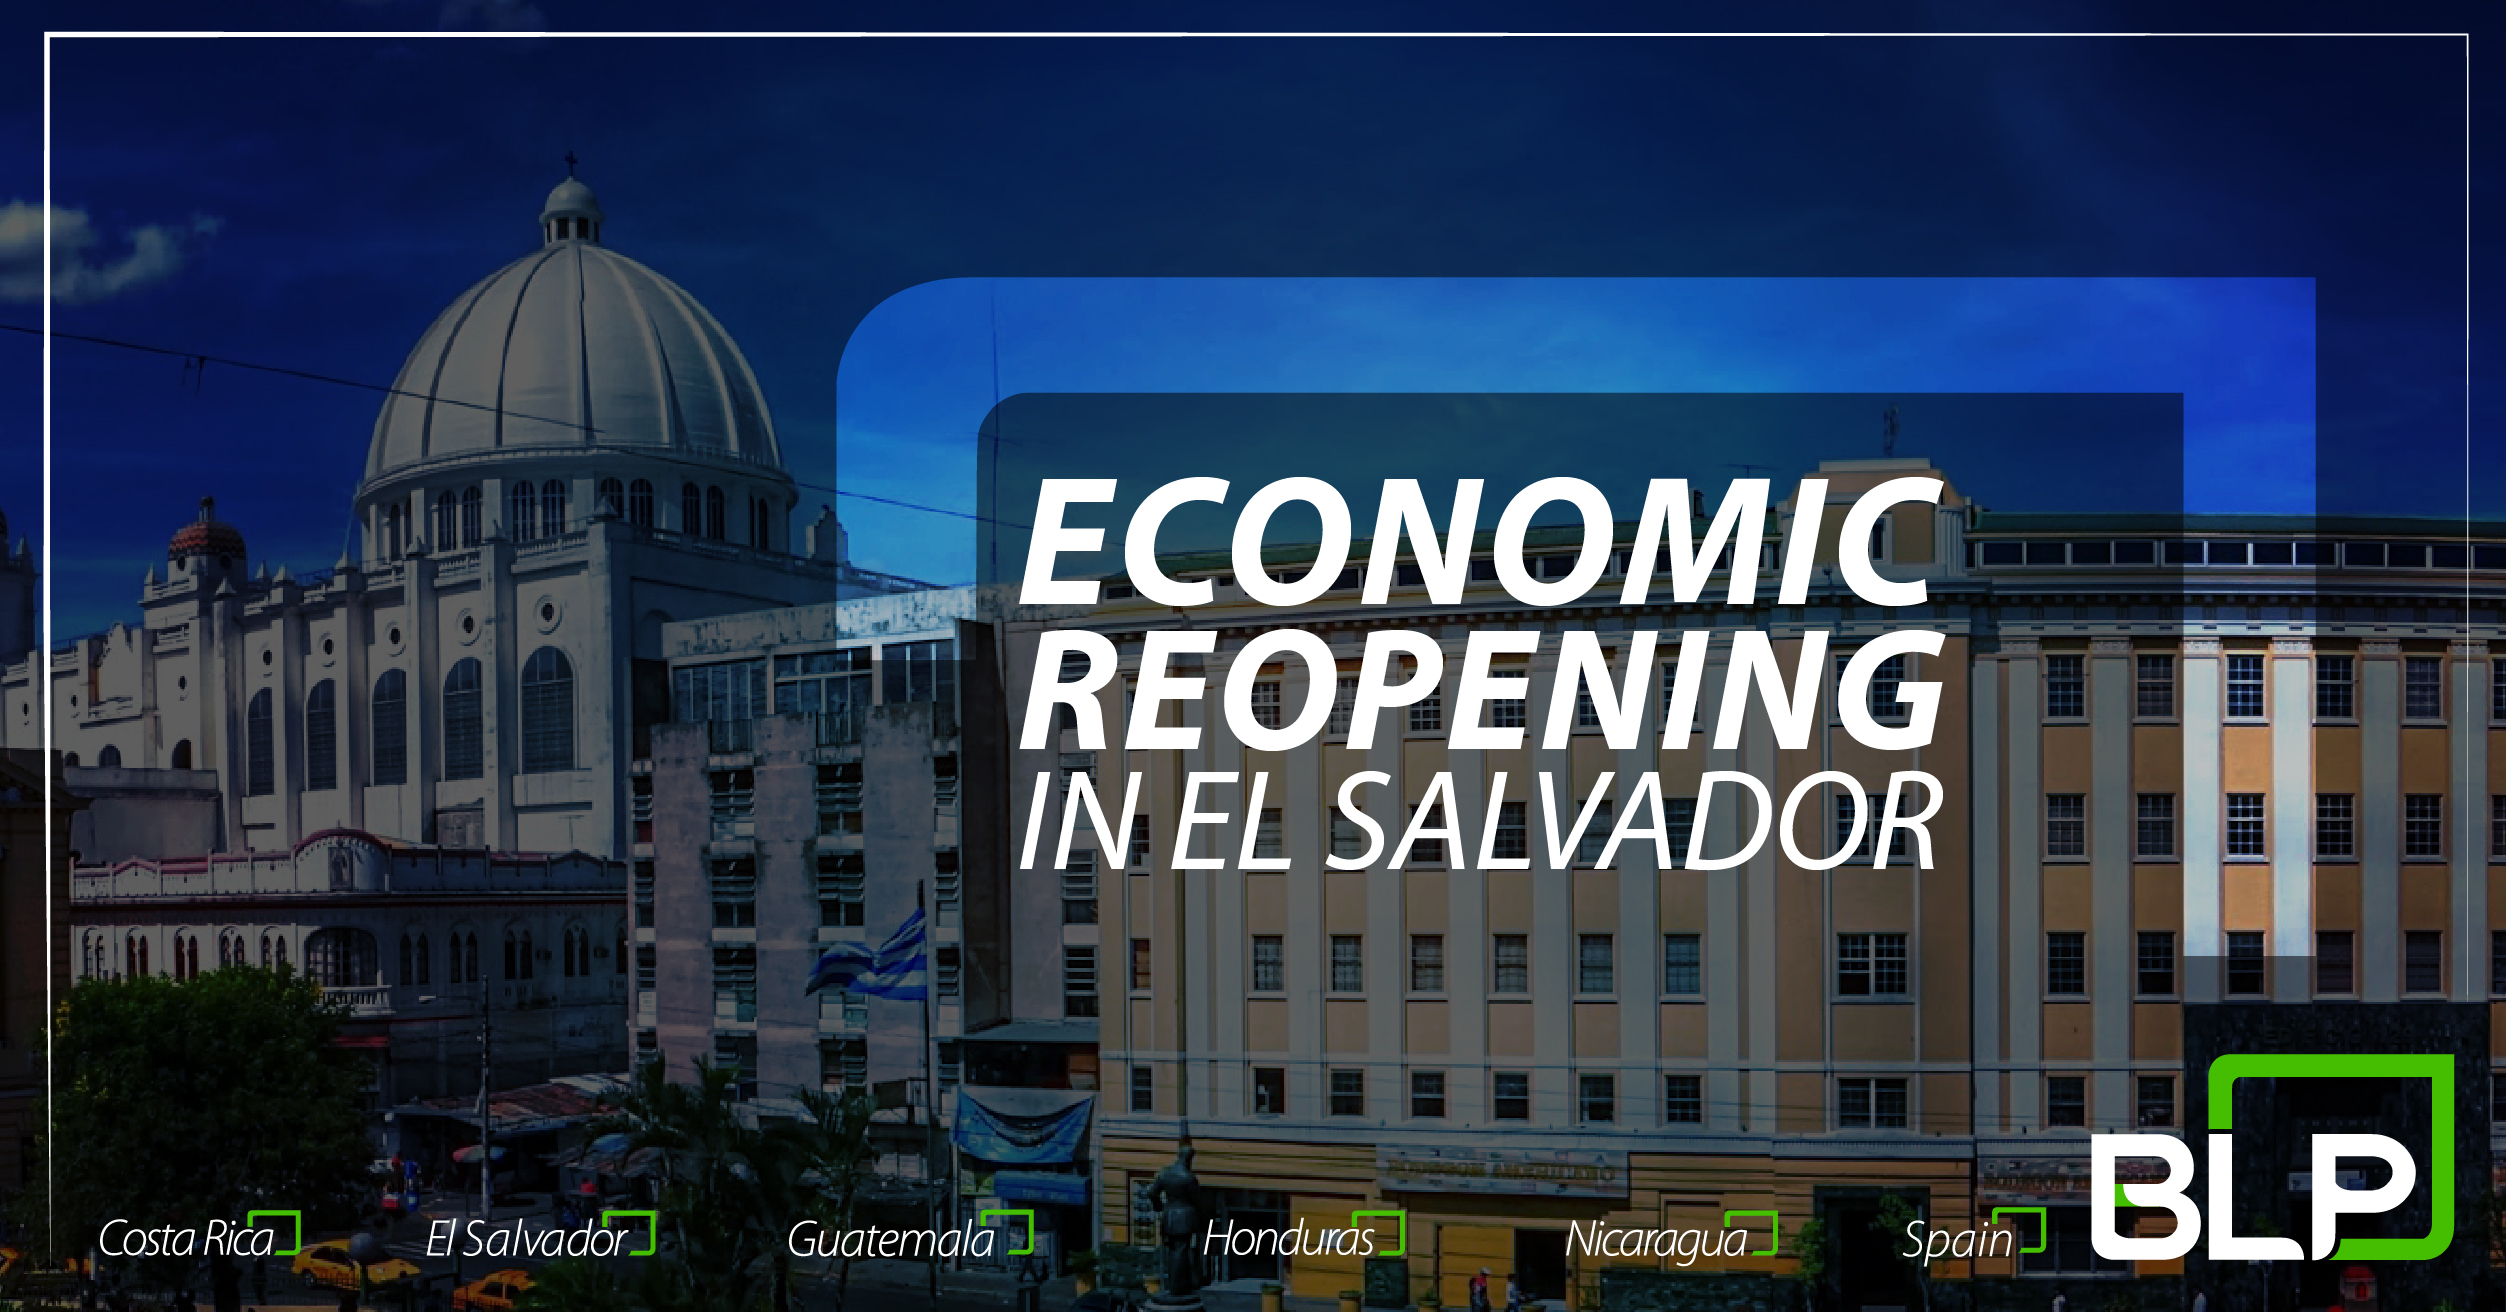 Government of El Salvador announces phases of economic reopening.